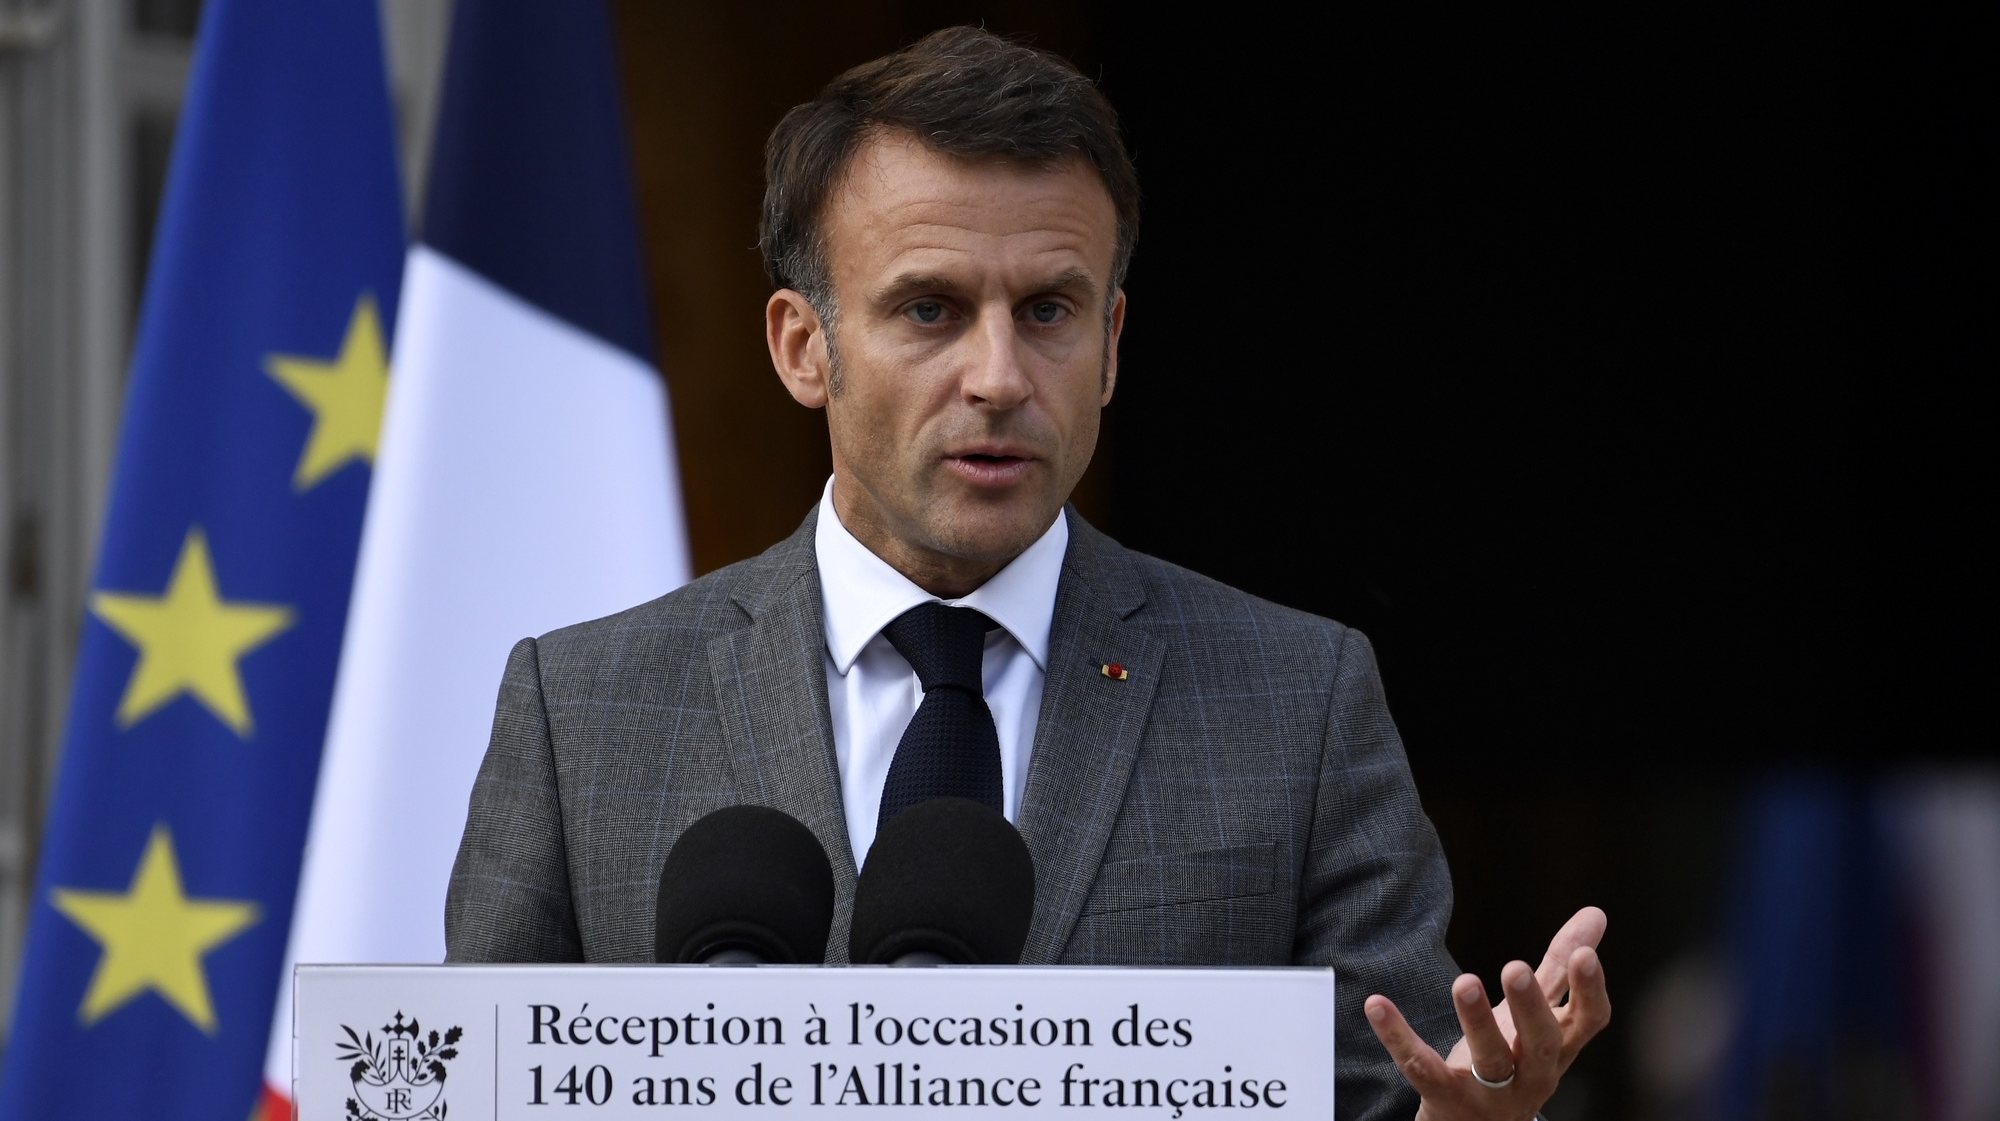 epa10760753 French President Emmanuel Macron gives a speech during a ceremony to mark the 140th anniversary of the creation of the Alliance Francaise centres at the Elysee presidential palace in Paris, France, 21 July 2023.  EPA/JULIEN DE ROSA / POOL  MAXPPP OUT